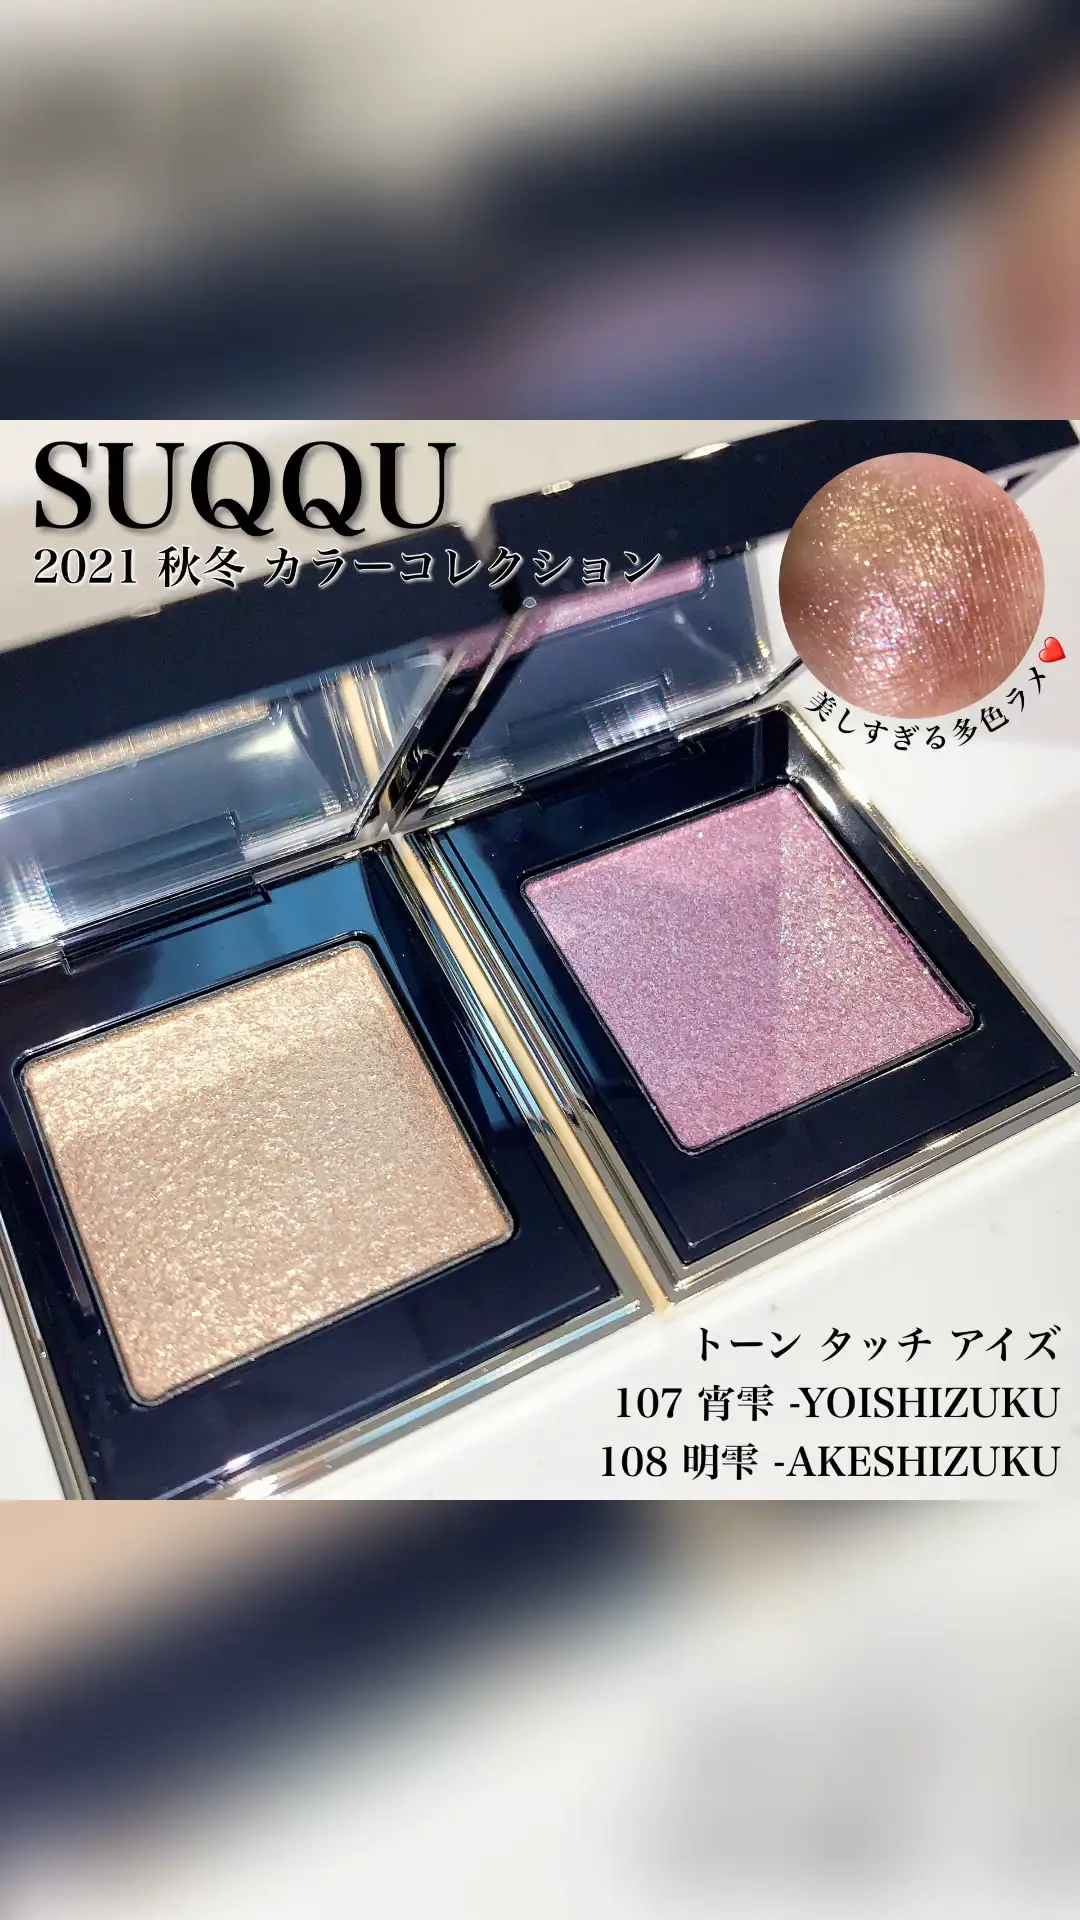 NEW SUQQU トーンタッチアイズ 107 宵雫 限定